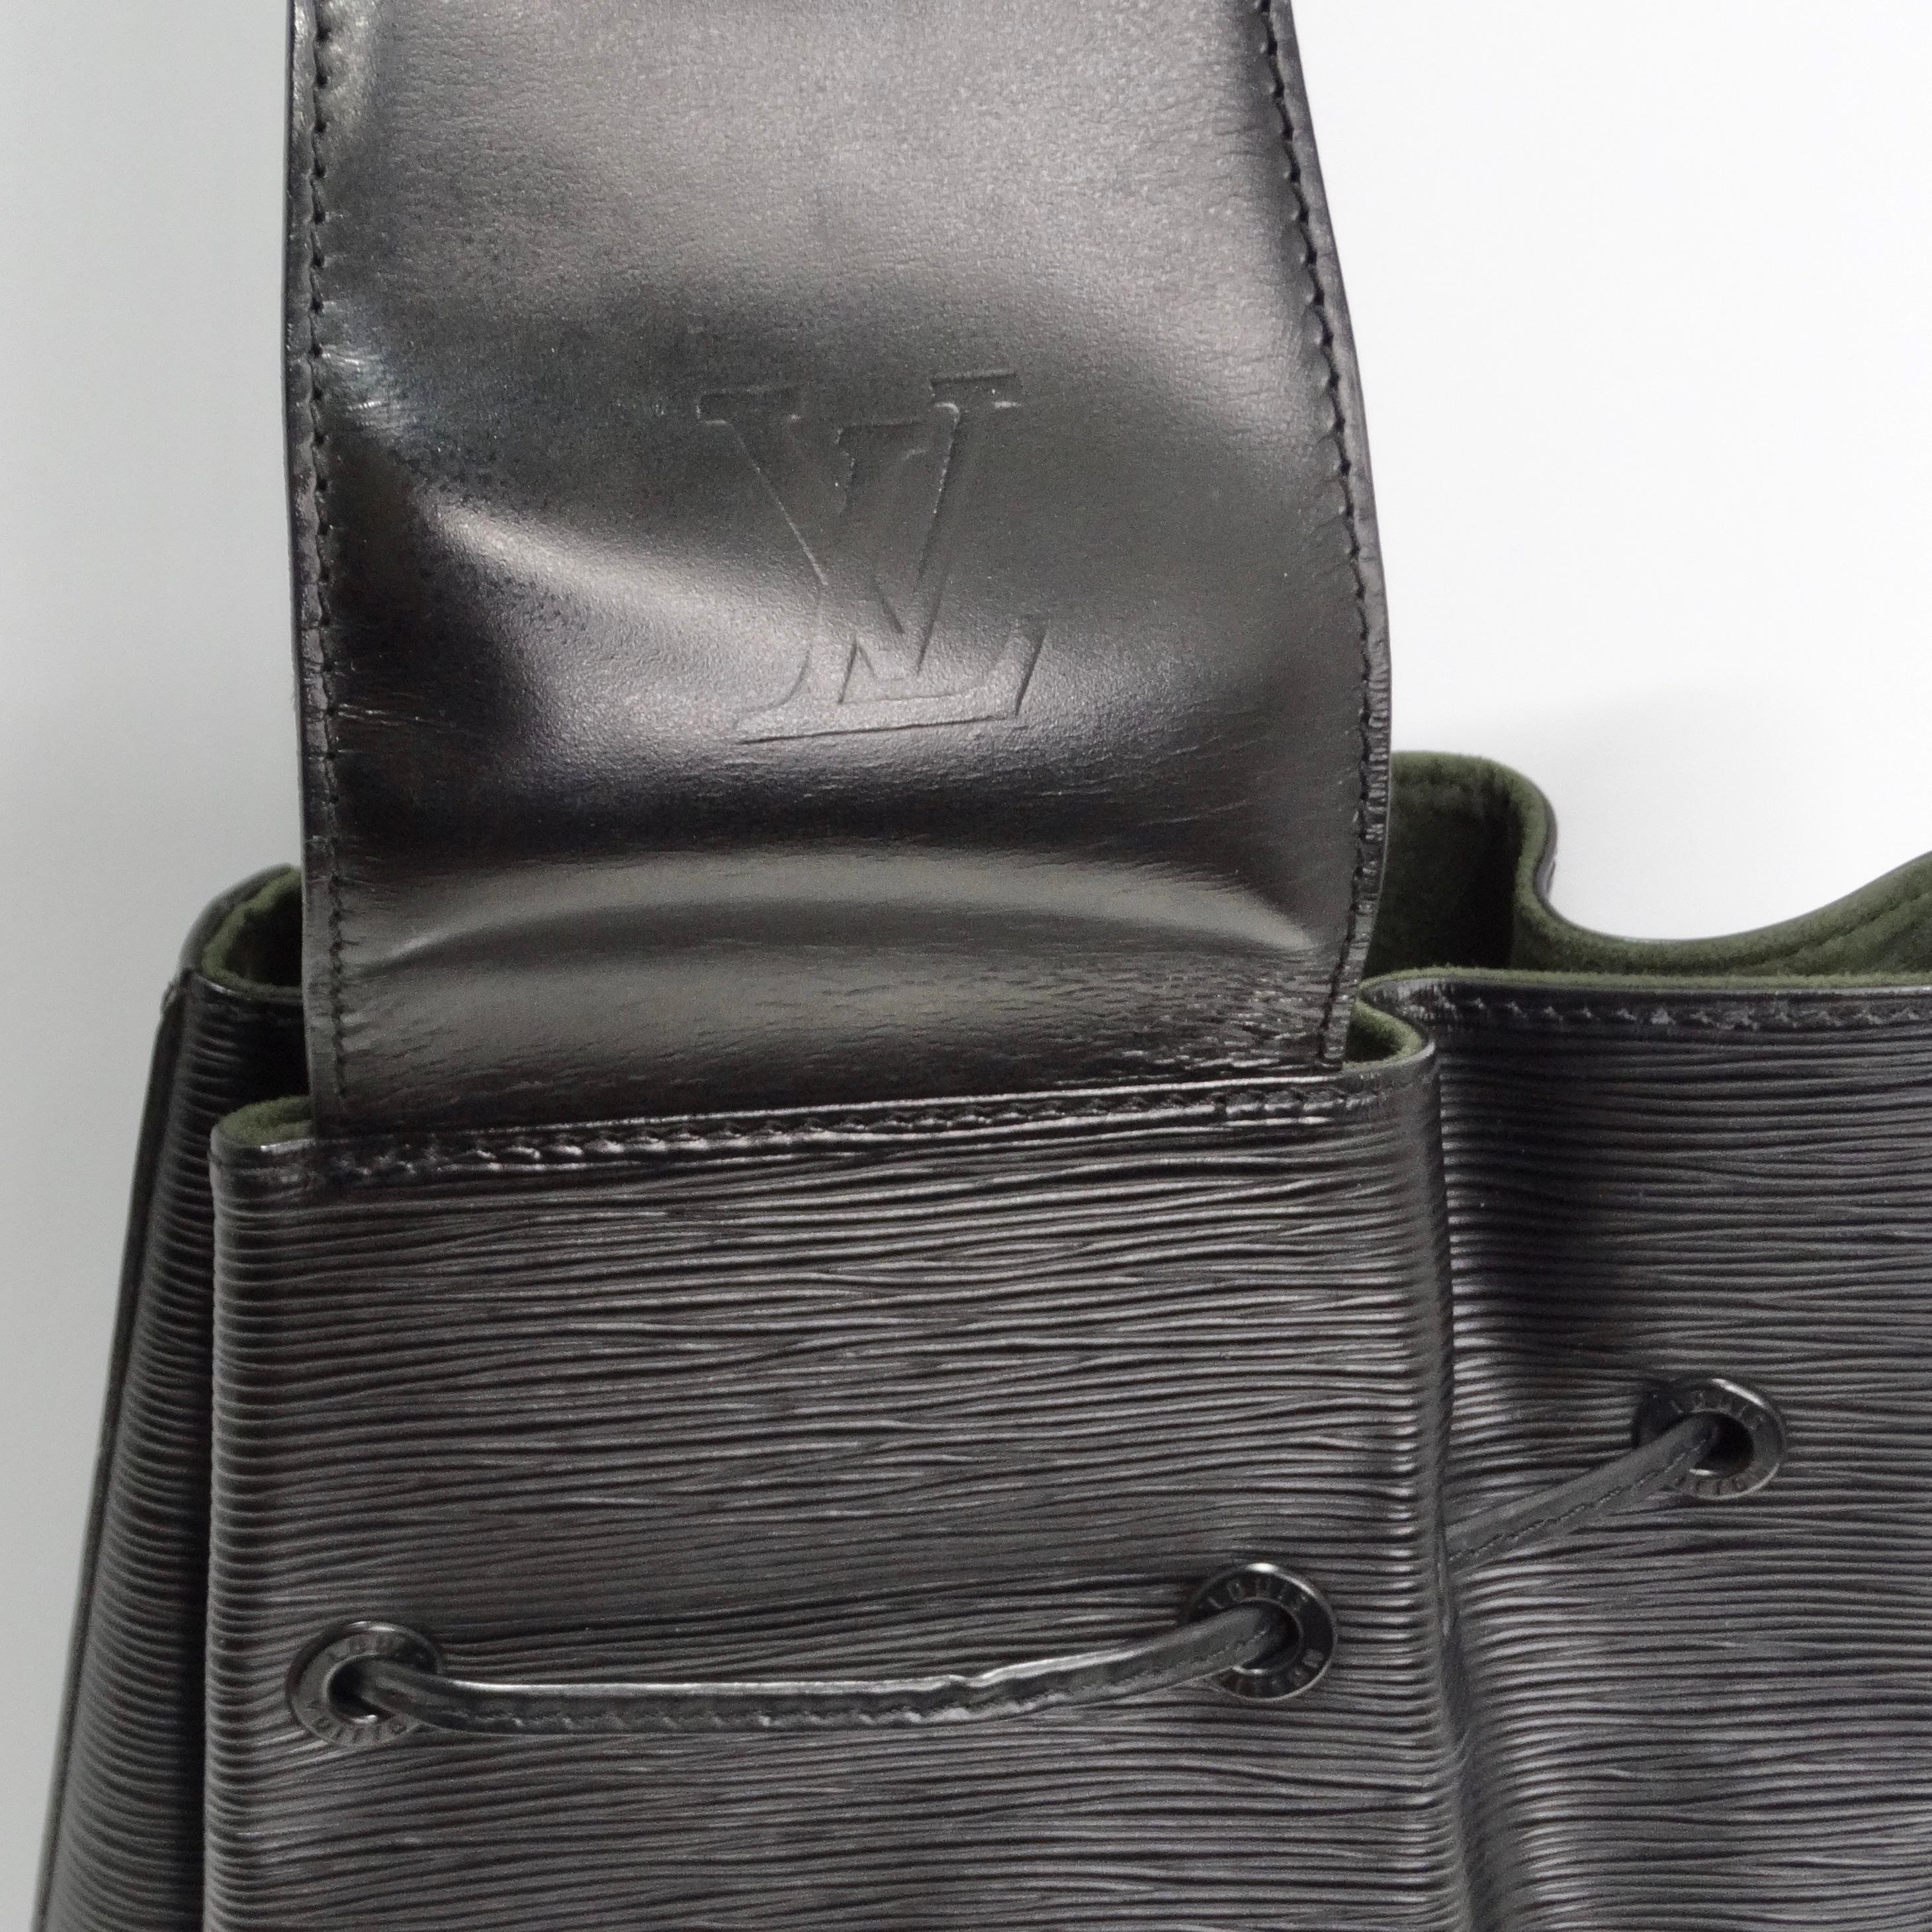 Introducing the Louis Vuitton Epi Leather Sac a Dos Drawstring Bag in Black, a stylish and versatile vintage shoulder bag crafted from Louis Vuitton's signature textured epi leather. This iconic bag features a long, smooth leather shoulder strap for